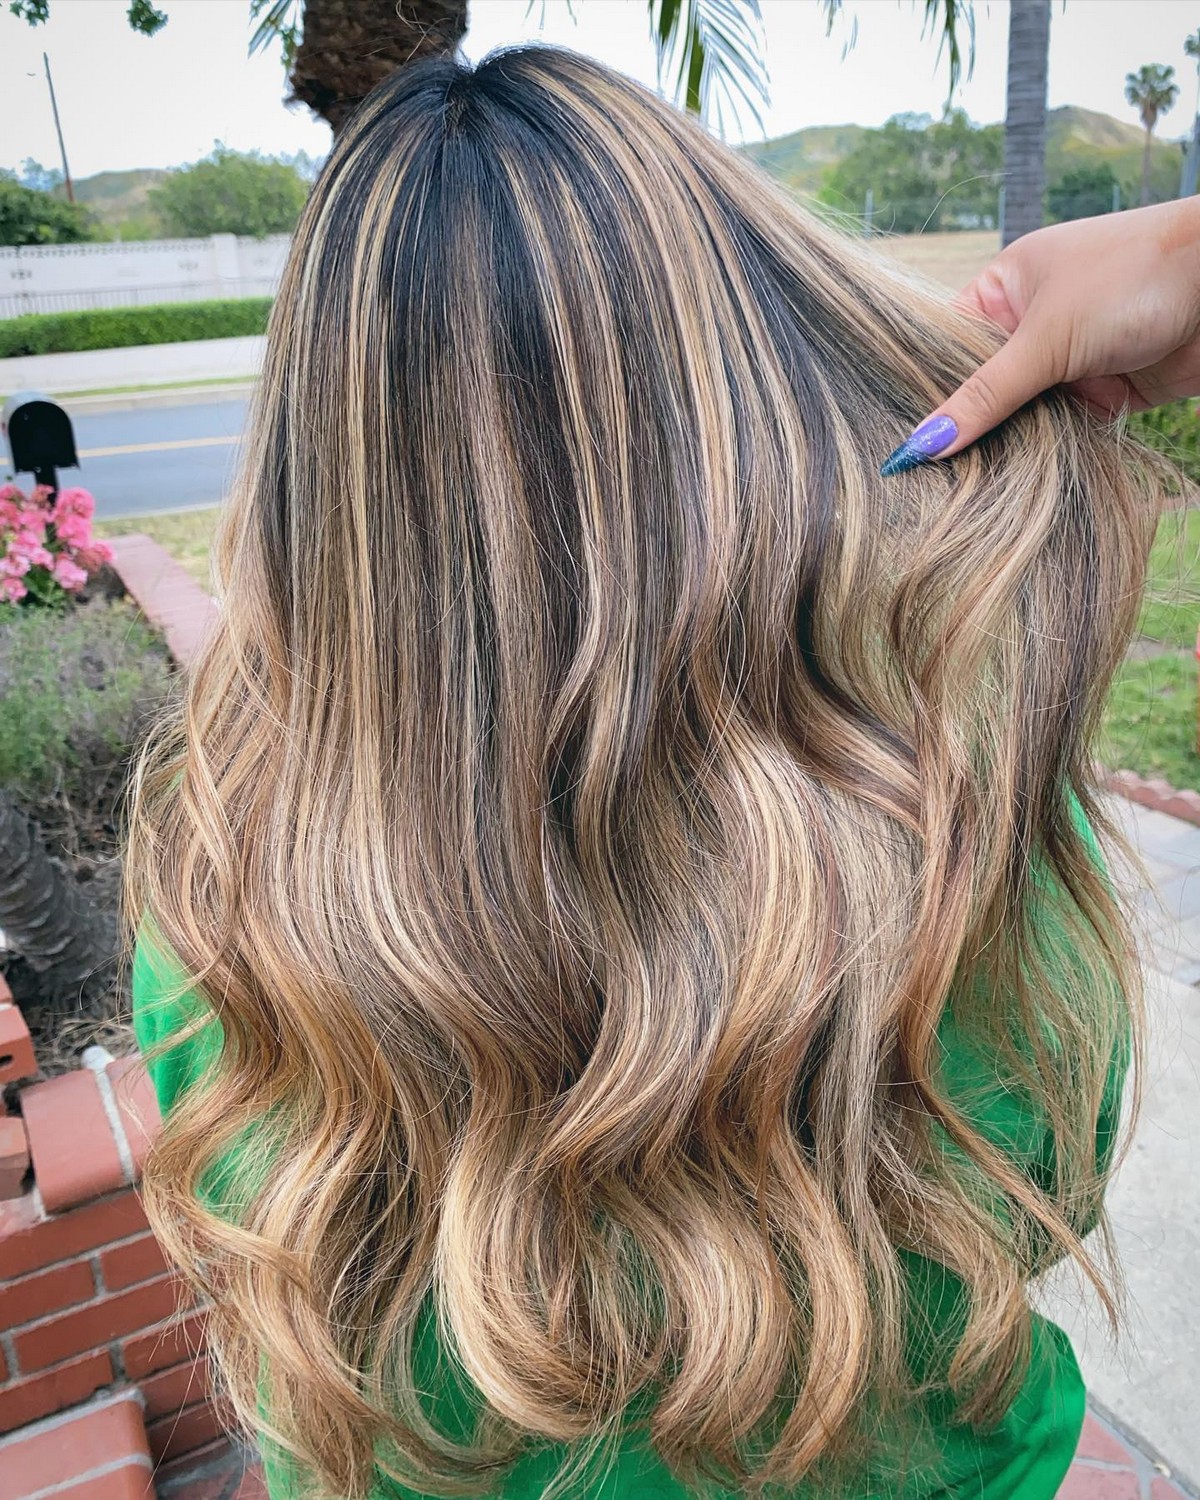 Honey Caramel Blonde Highlights With A Balayage Effect On Black Hair